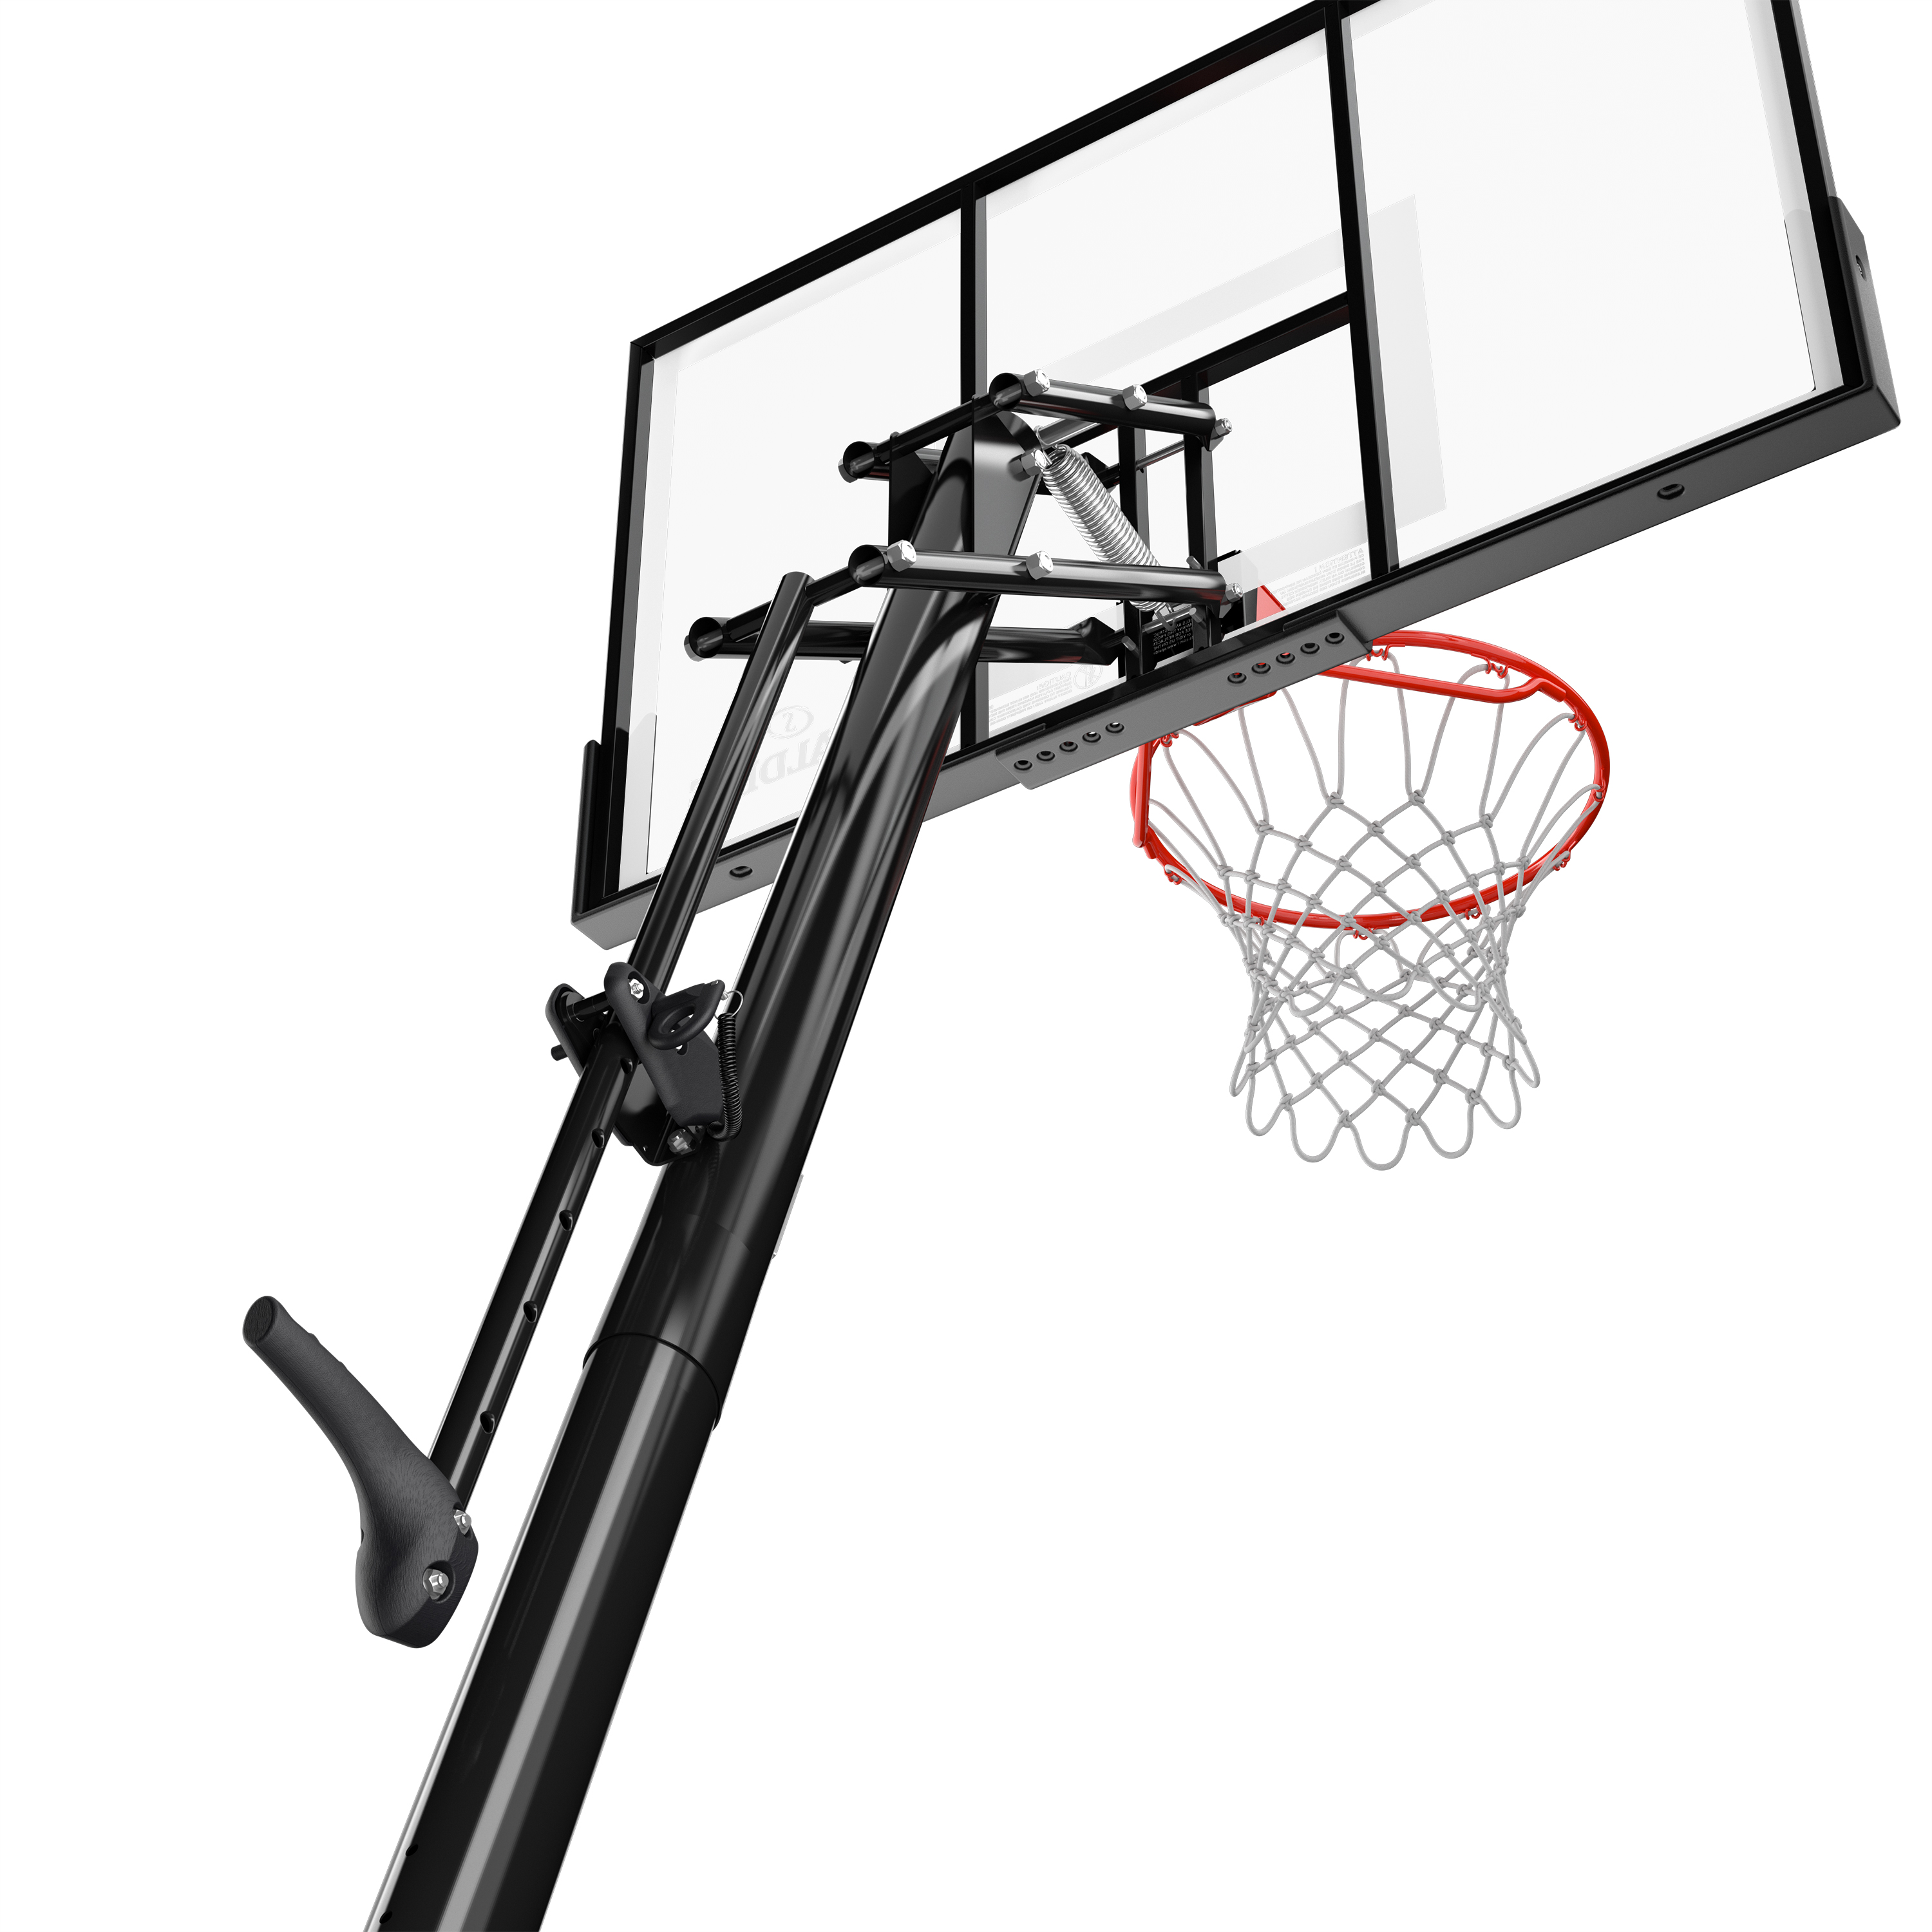 Spalding 54 inch Shatter-proof Polycarbonate Exacta Height® Portable Basketball Hoop System - image 5 of 12